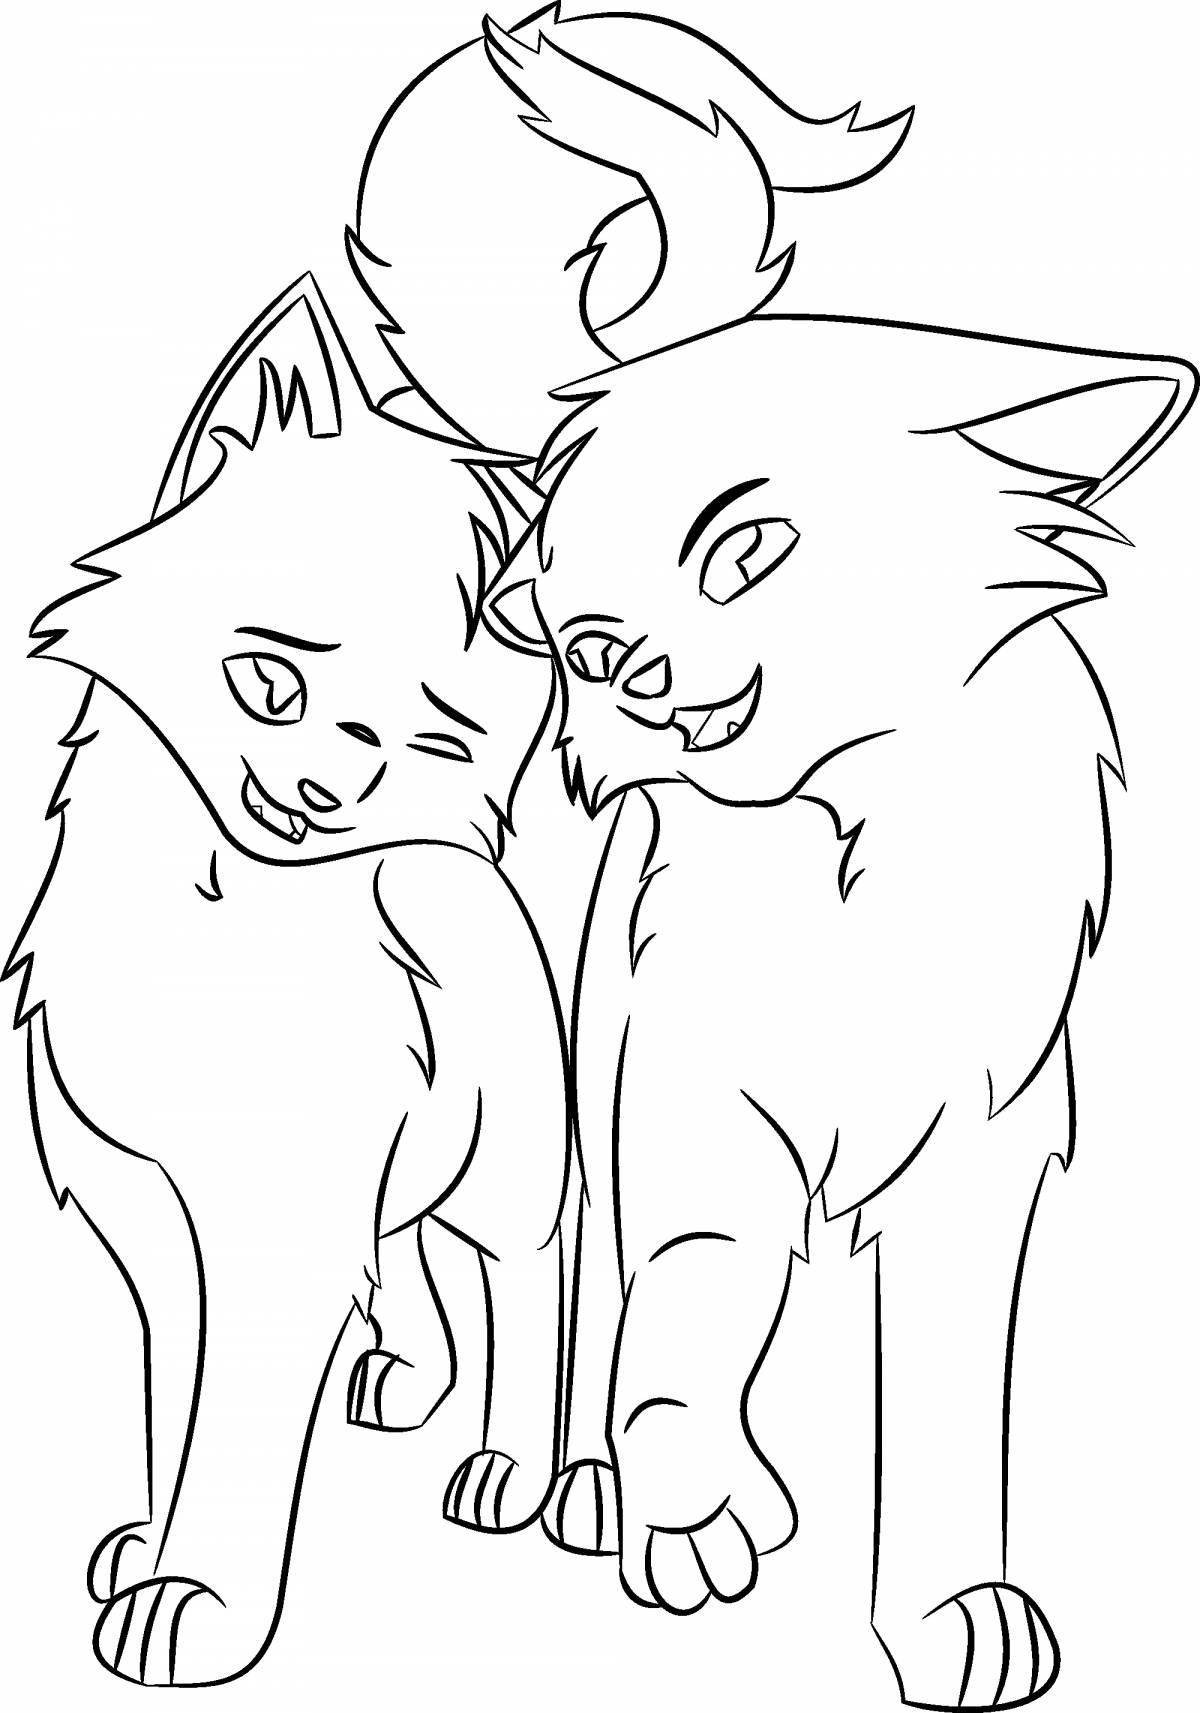 Coloring page gorgeous warrior cats fighting